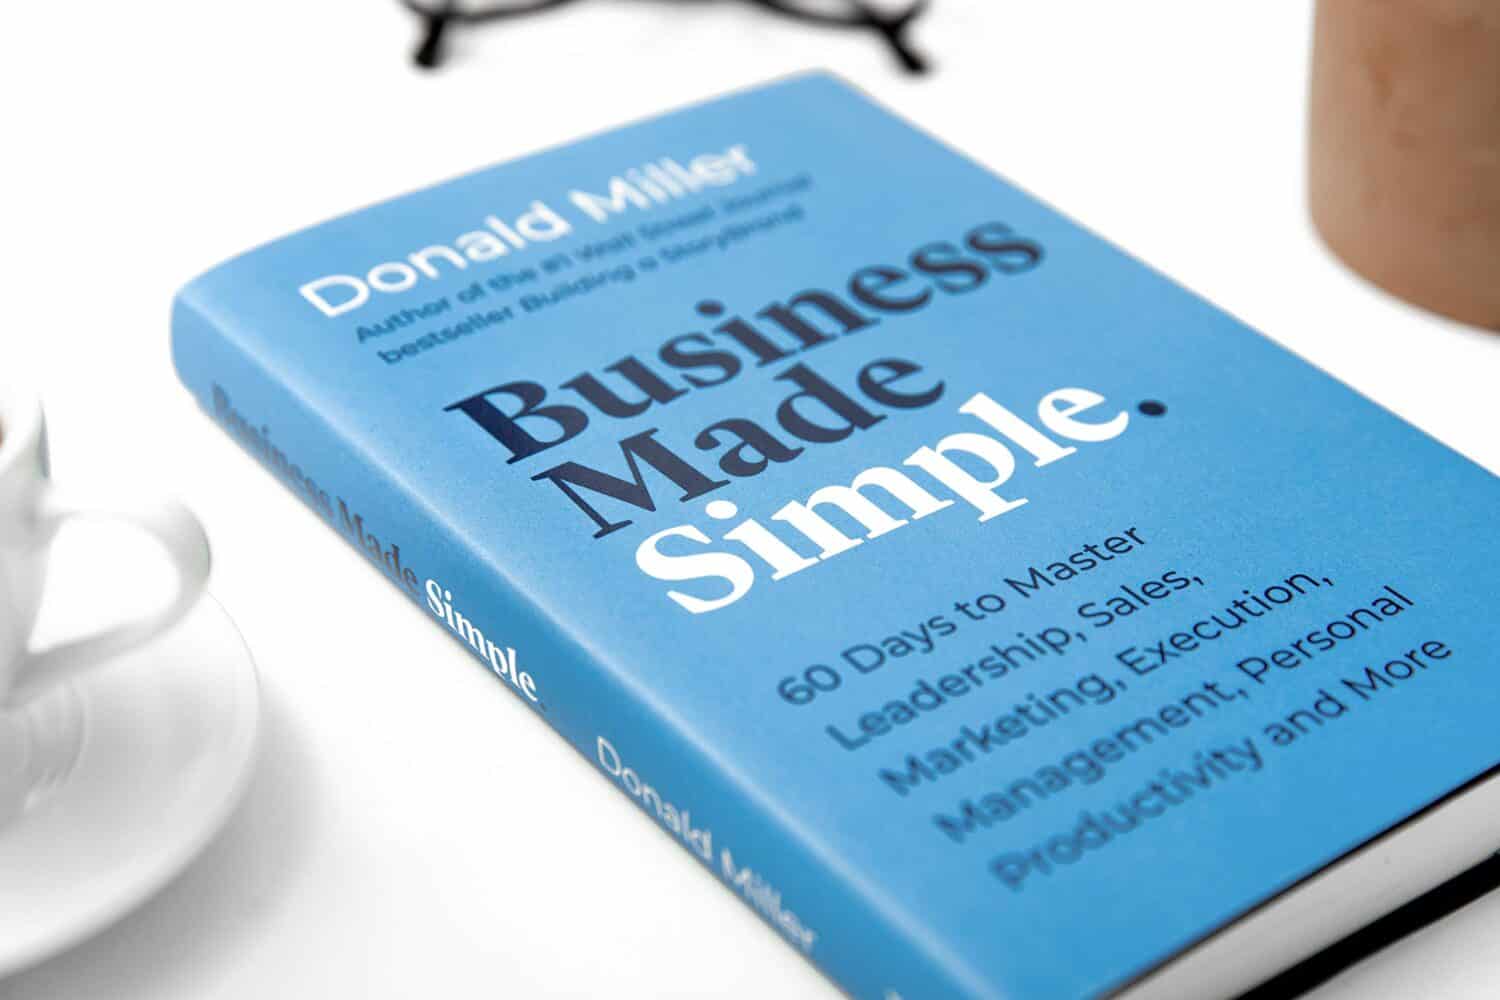 Business Blues? Check out Donald Miller's "Business Made Simple"